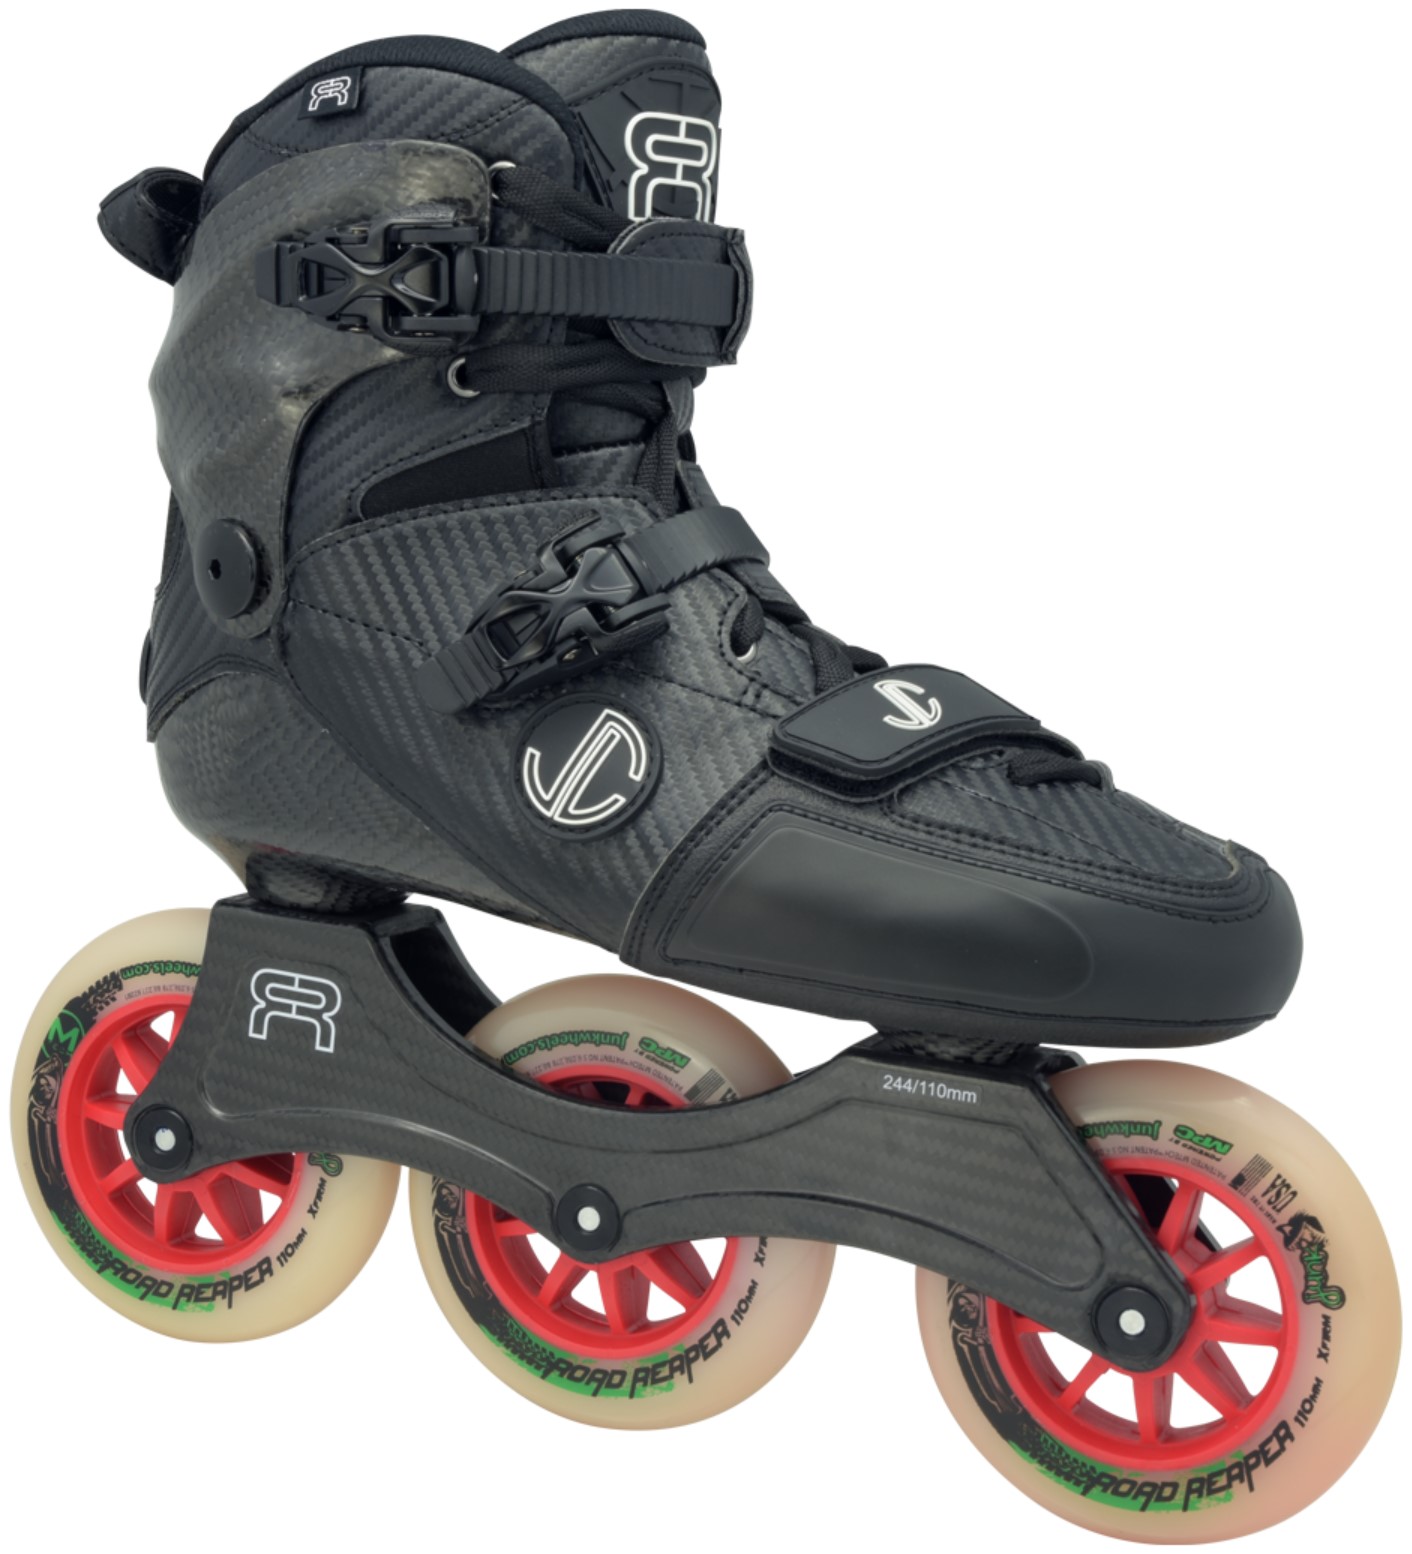 FR SL Carbon 310 inline skate with carbon shell, carbonn cuff and carbon frame for 3 x 110 mm wheels